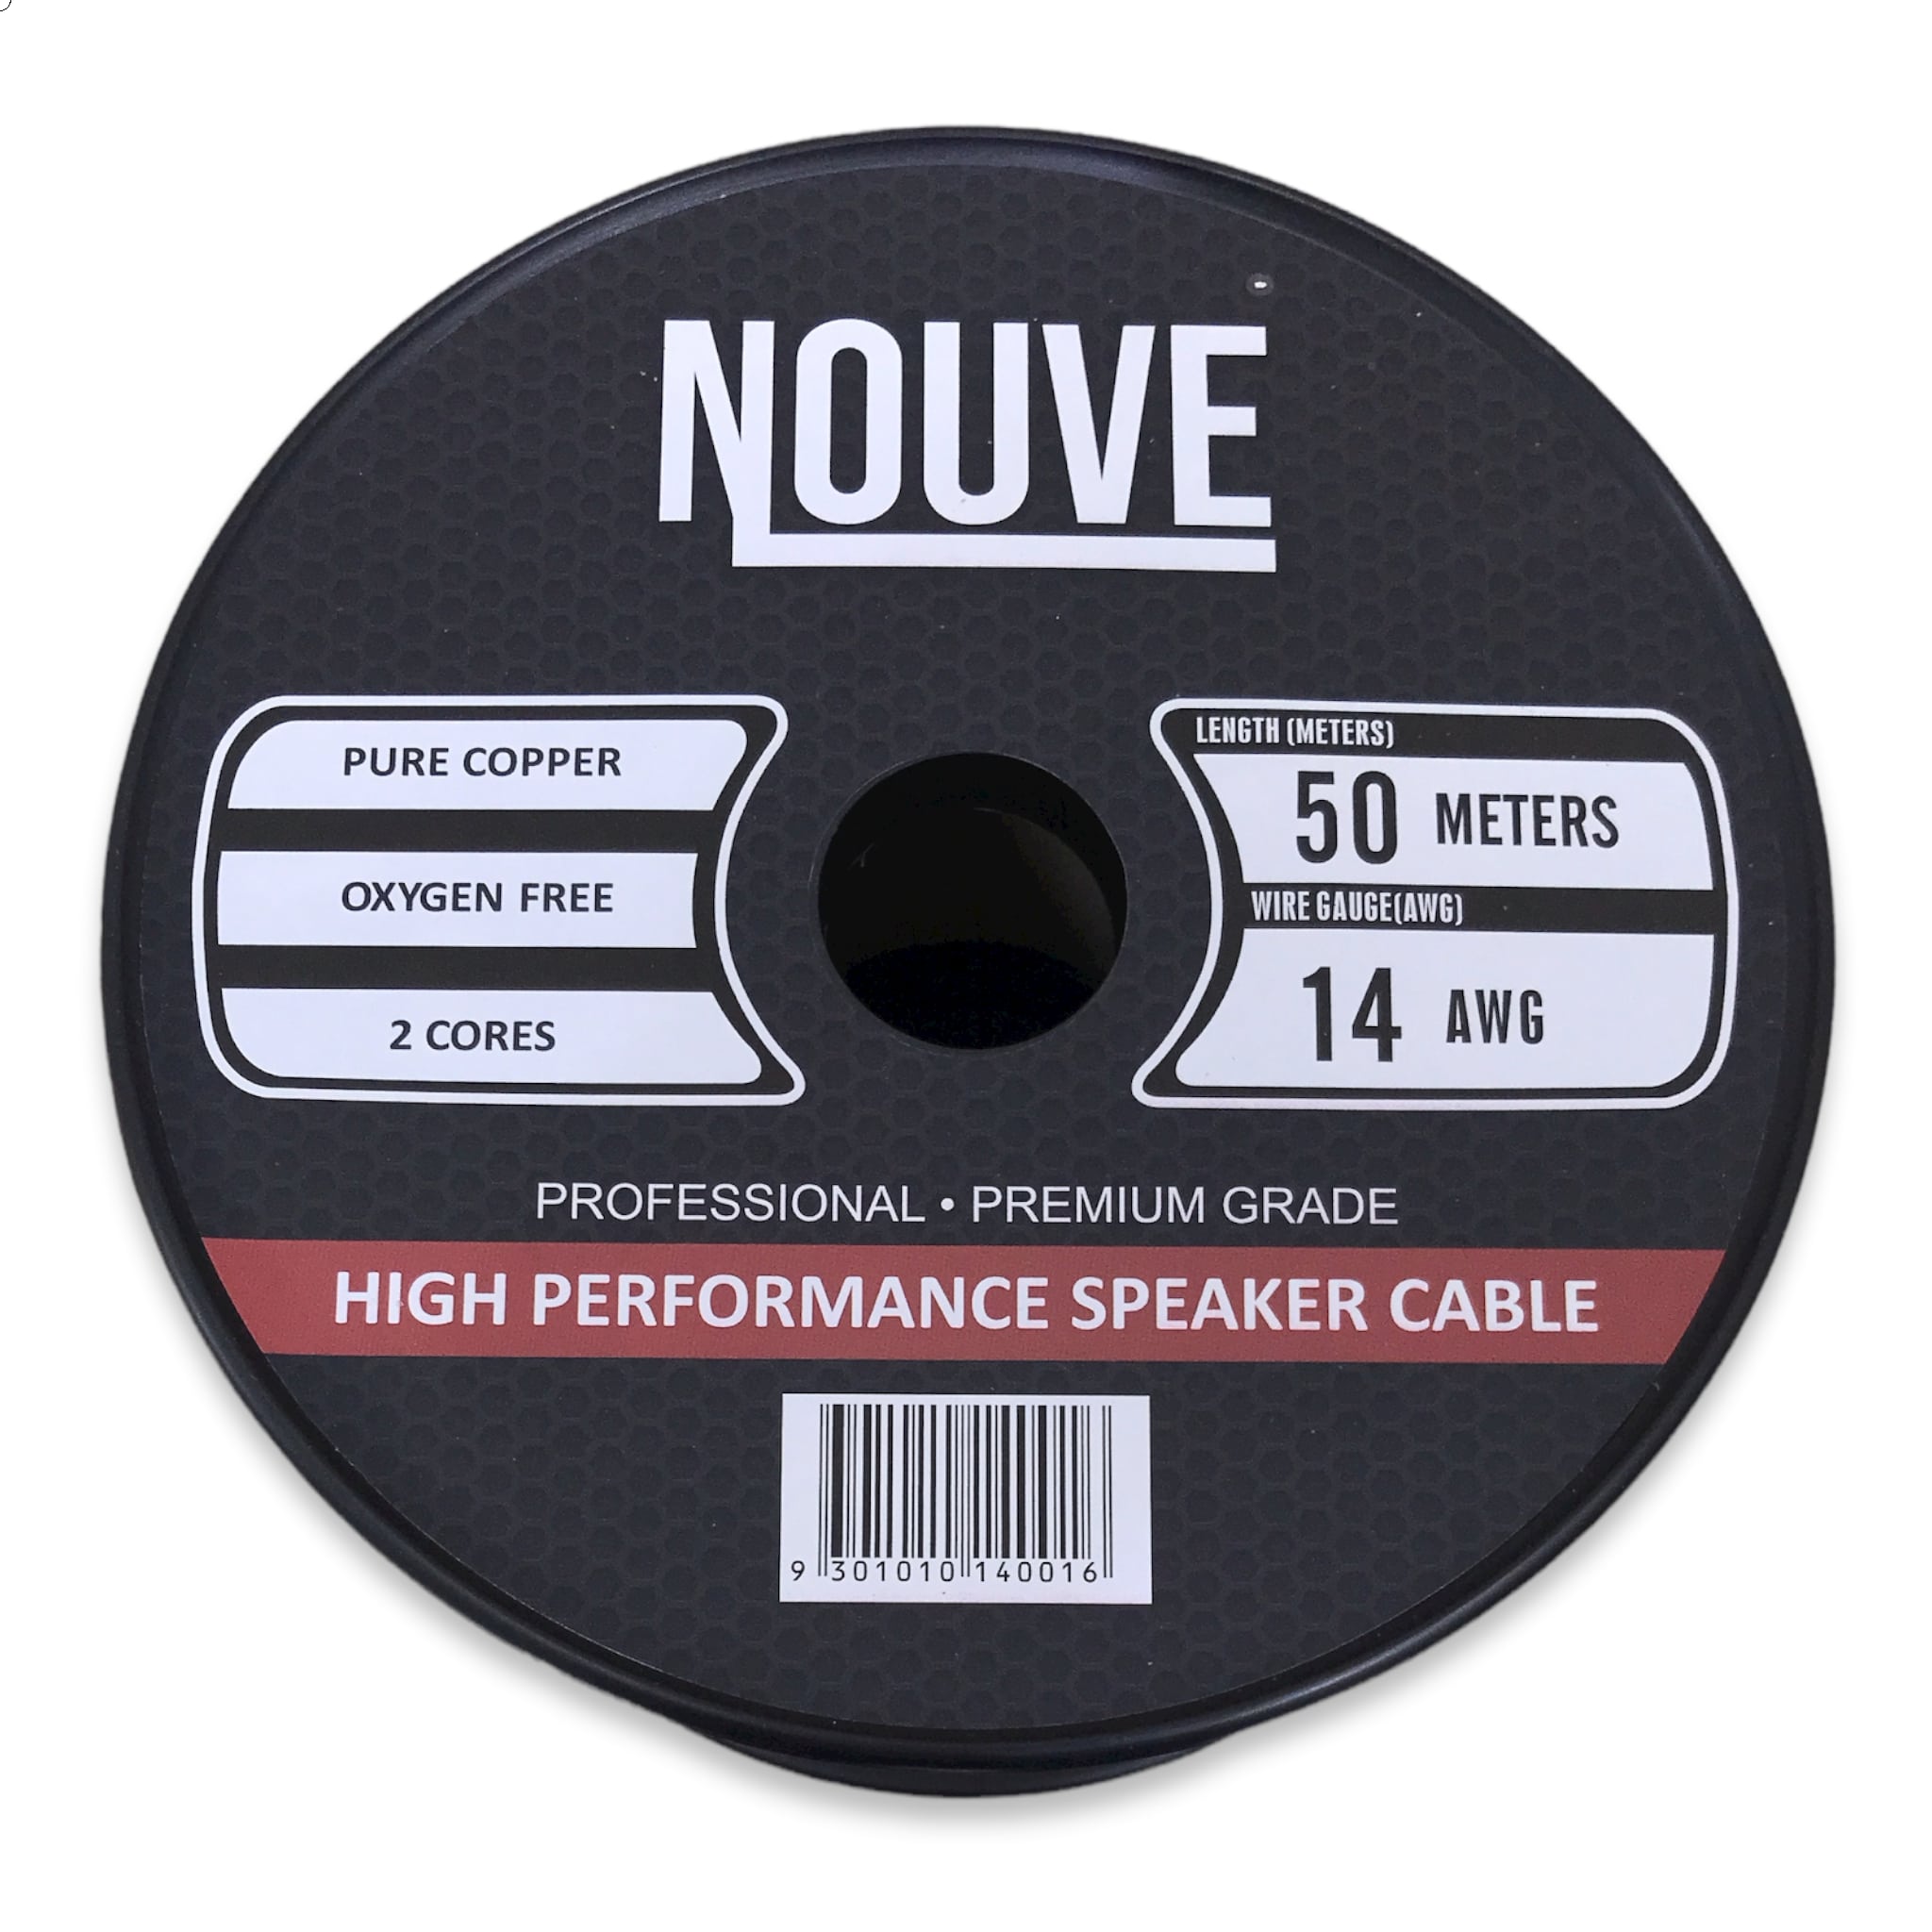 14 awg speaker cable pure copper cover